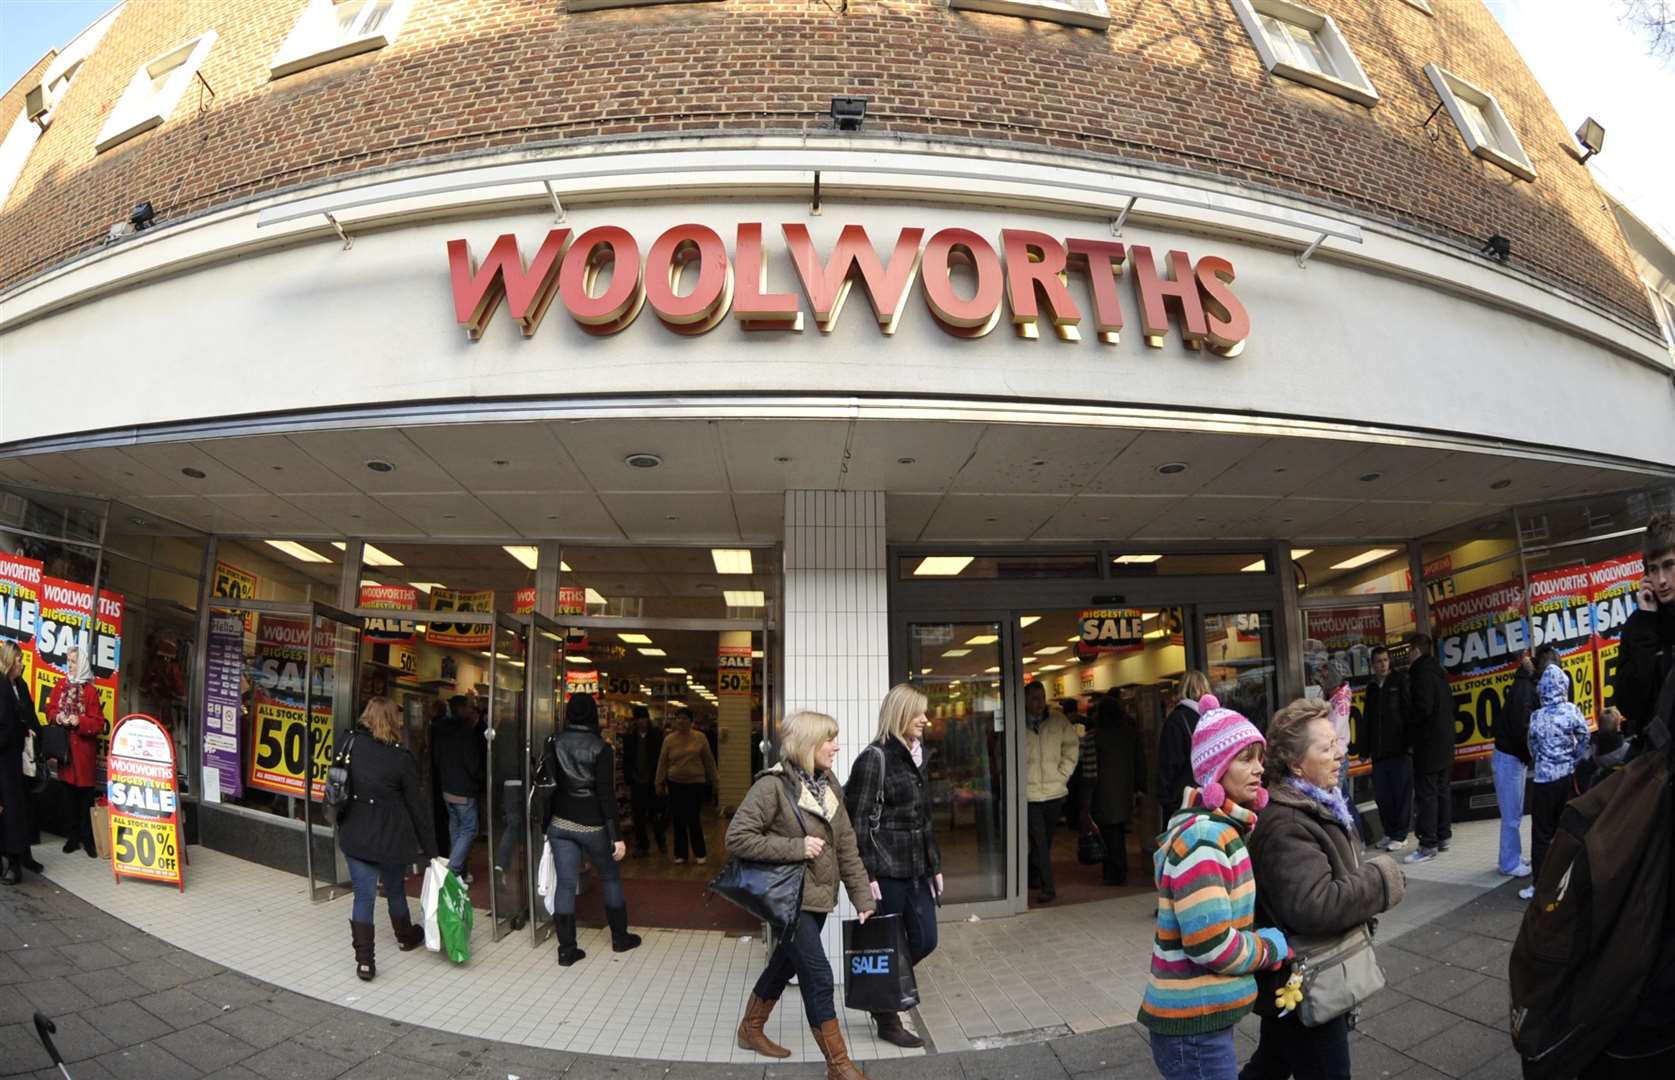 Woolworths...gone but not forgotten